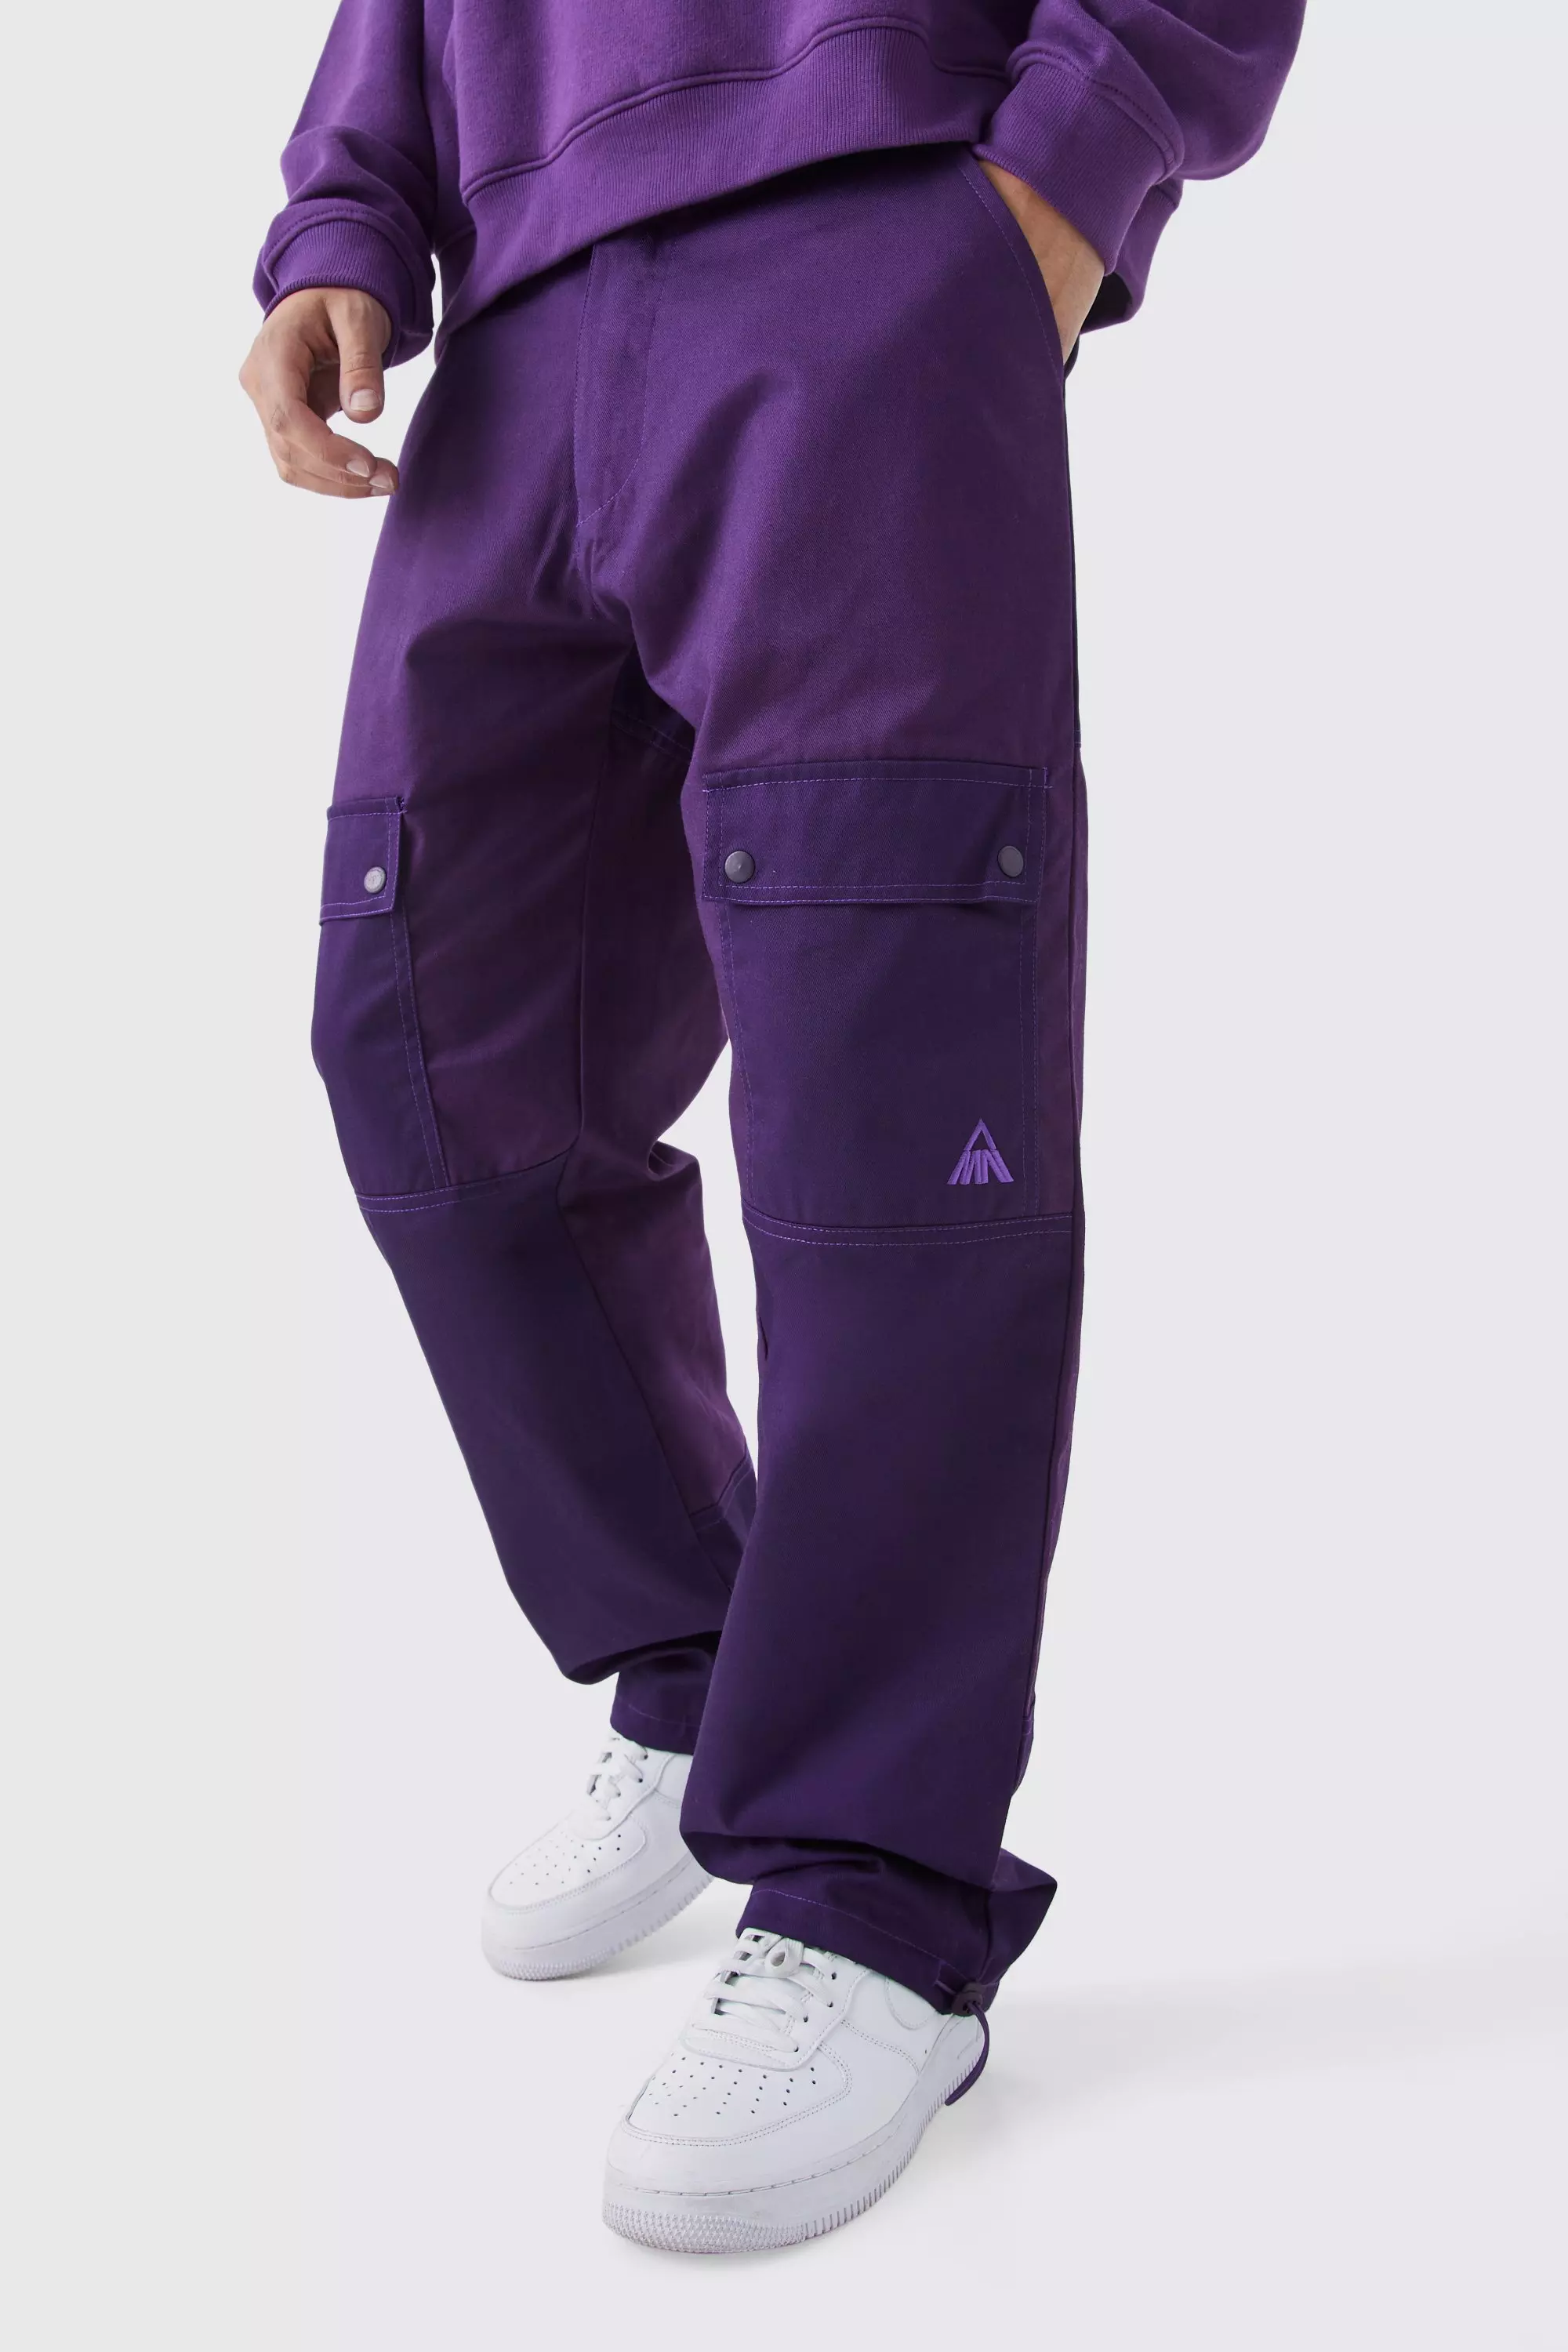 Relaxed Fit Colour Block Tonal Branded Cargo Pants Purple